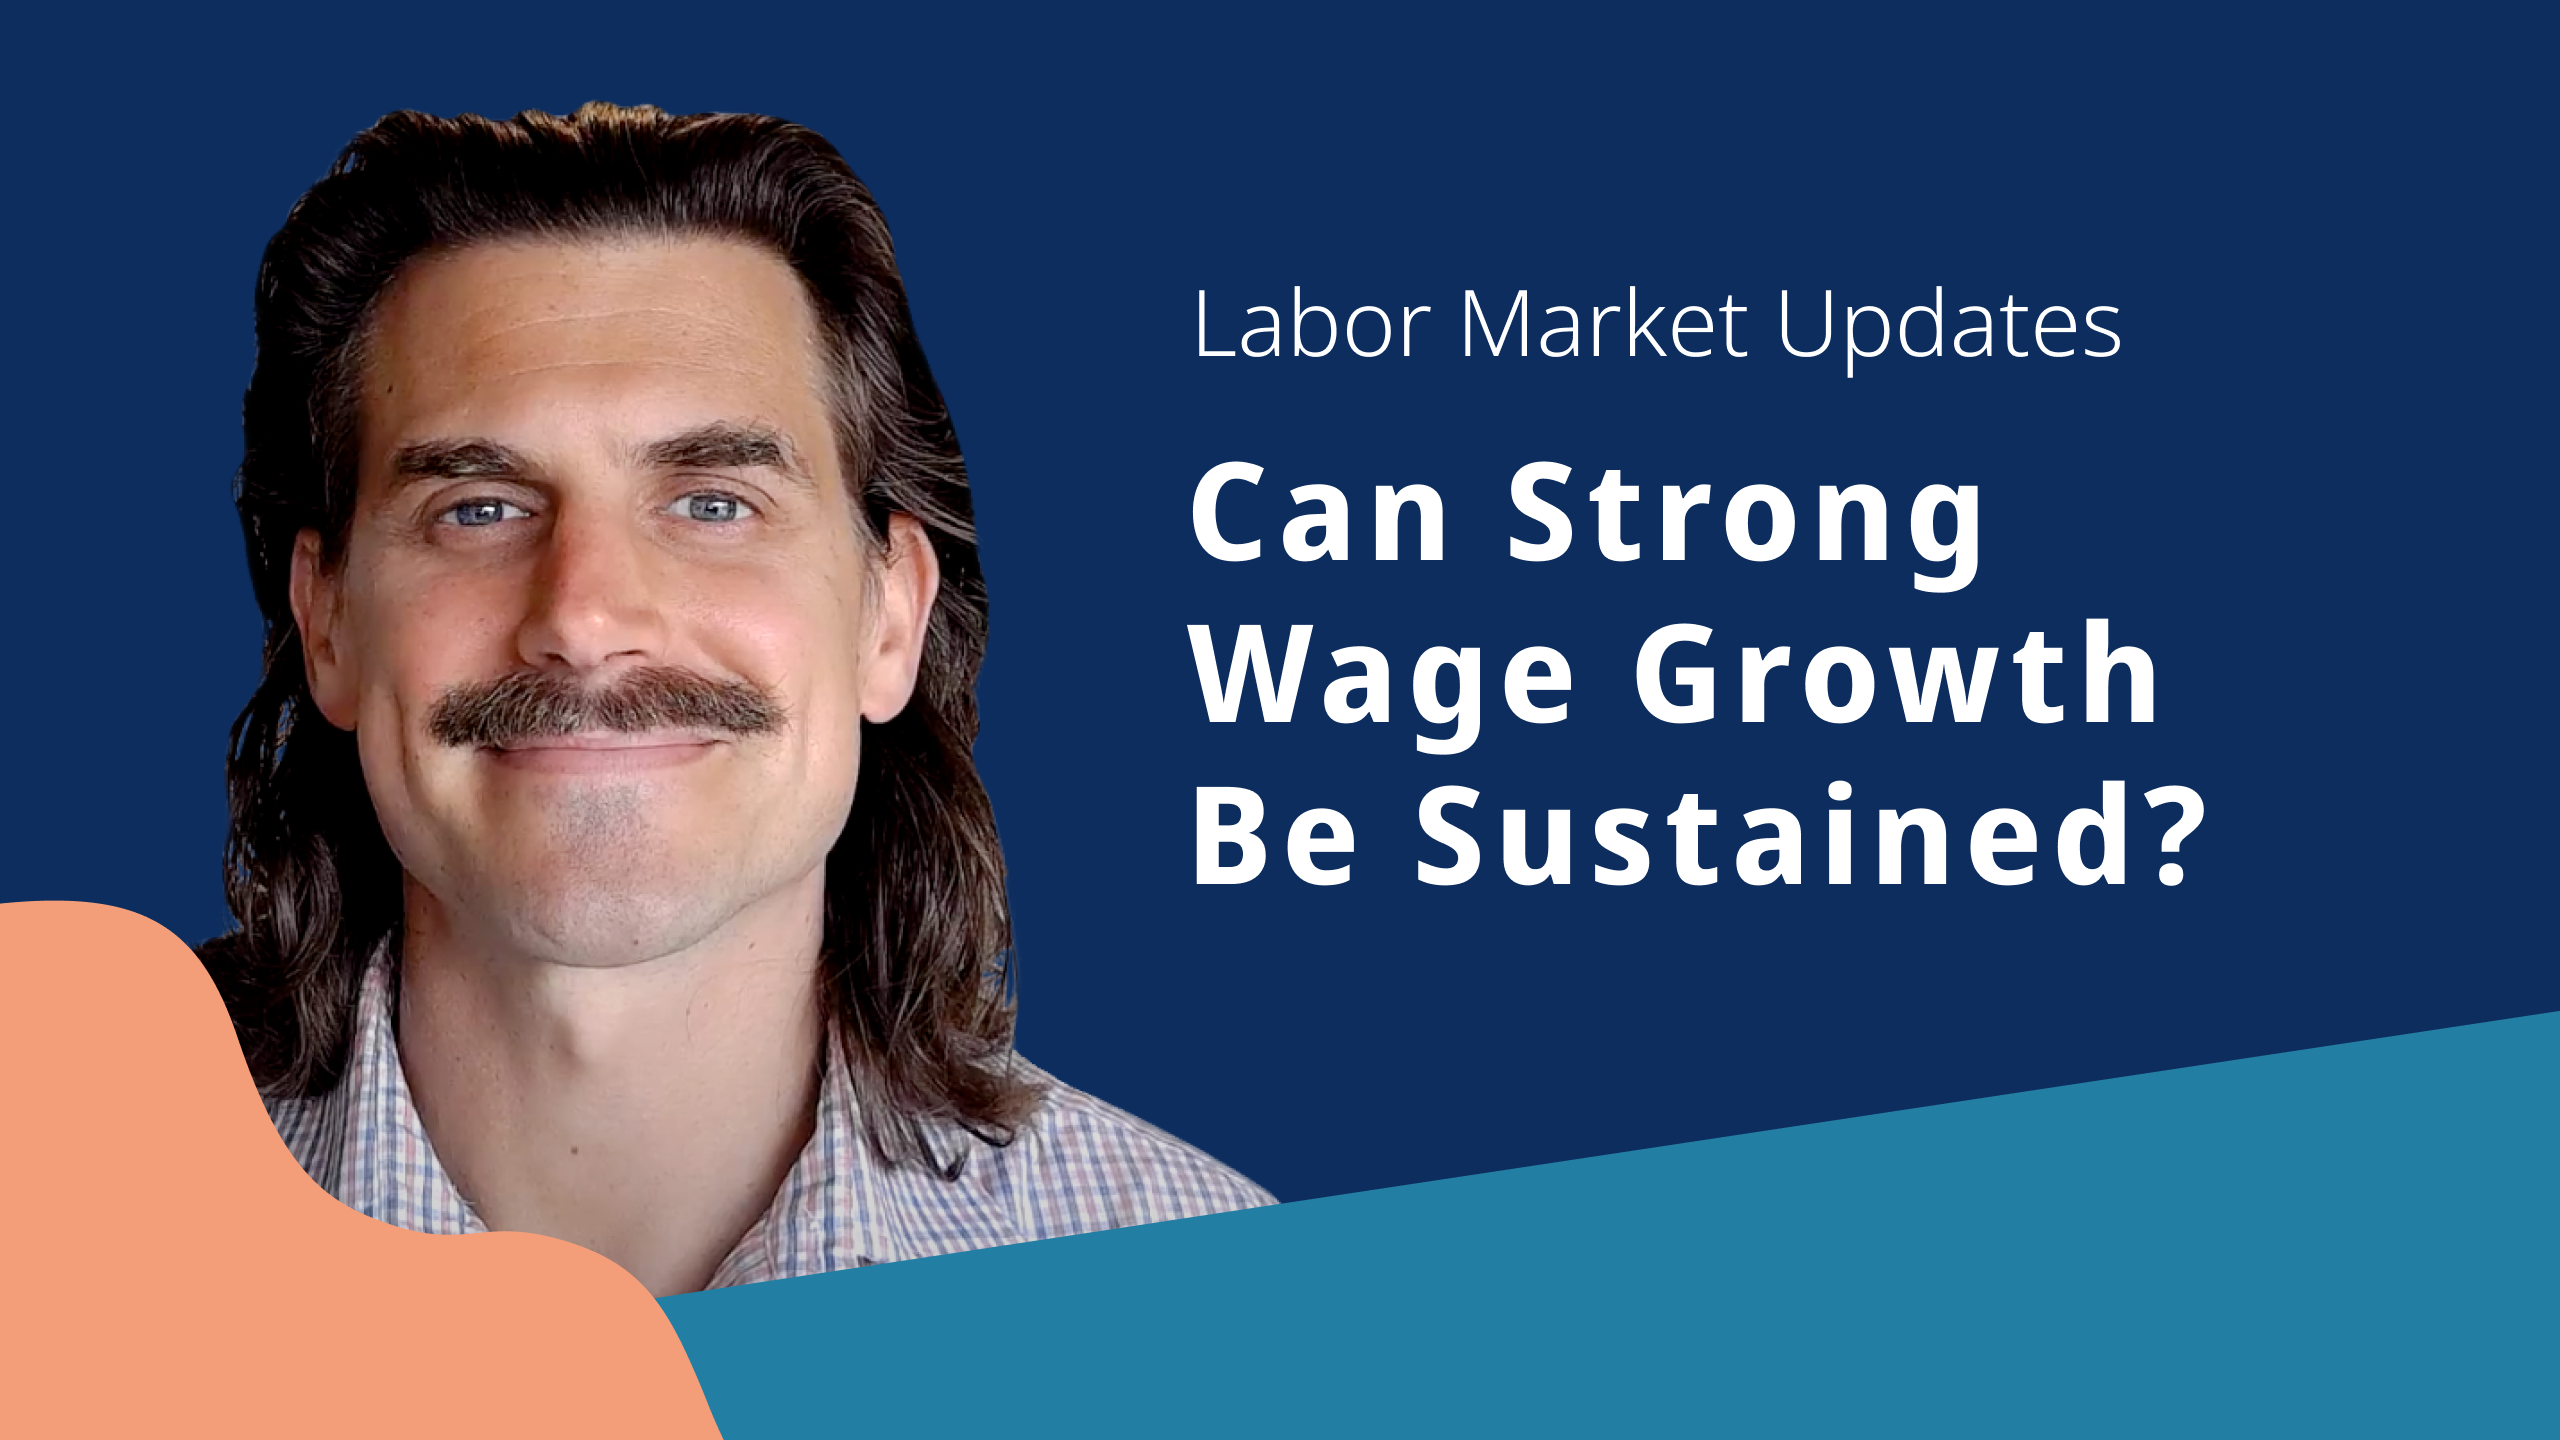 Thumbnail of Indeed Economist Daniel Culbertson with the text Labor Market Update: Can Strong Wage Growth Be Sustained?